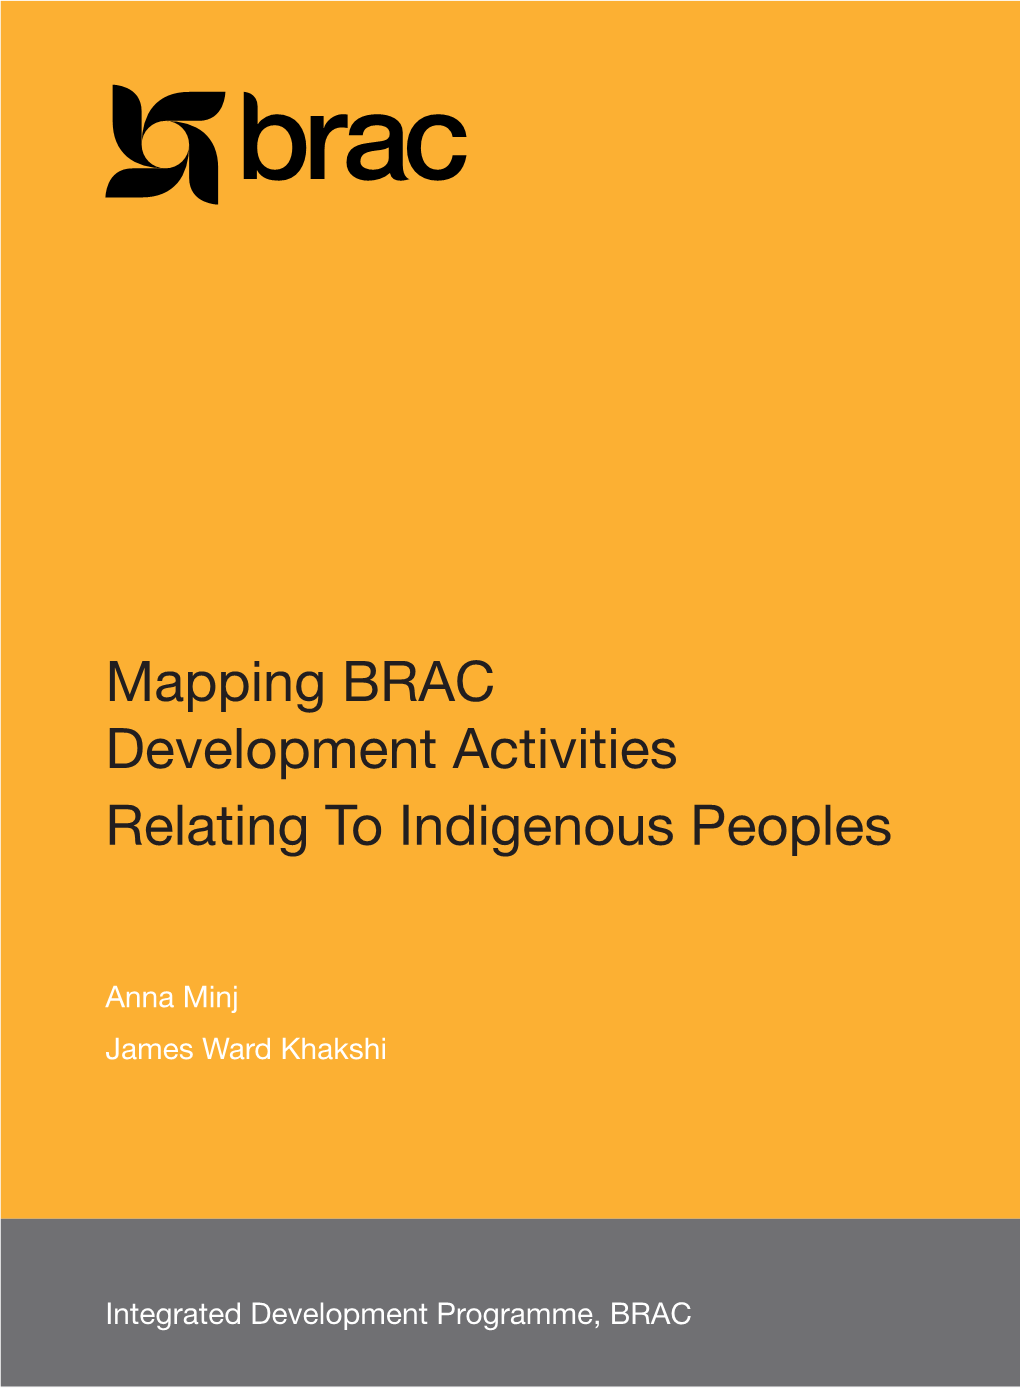 Mapping BRAC Development Activities Relating to Indigenous Peoples